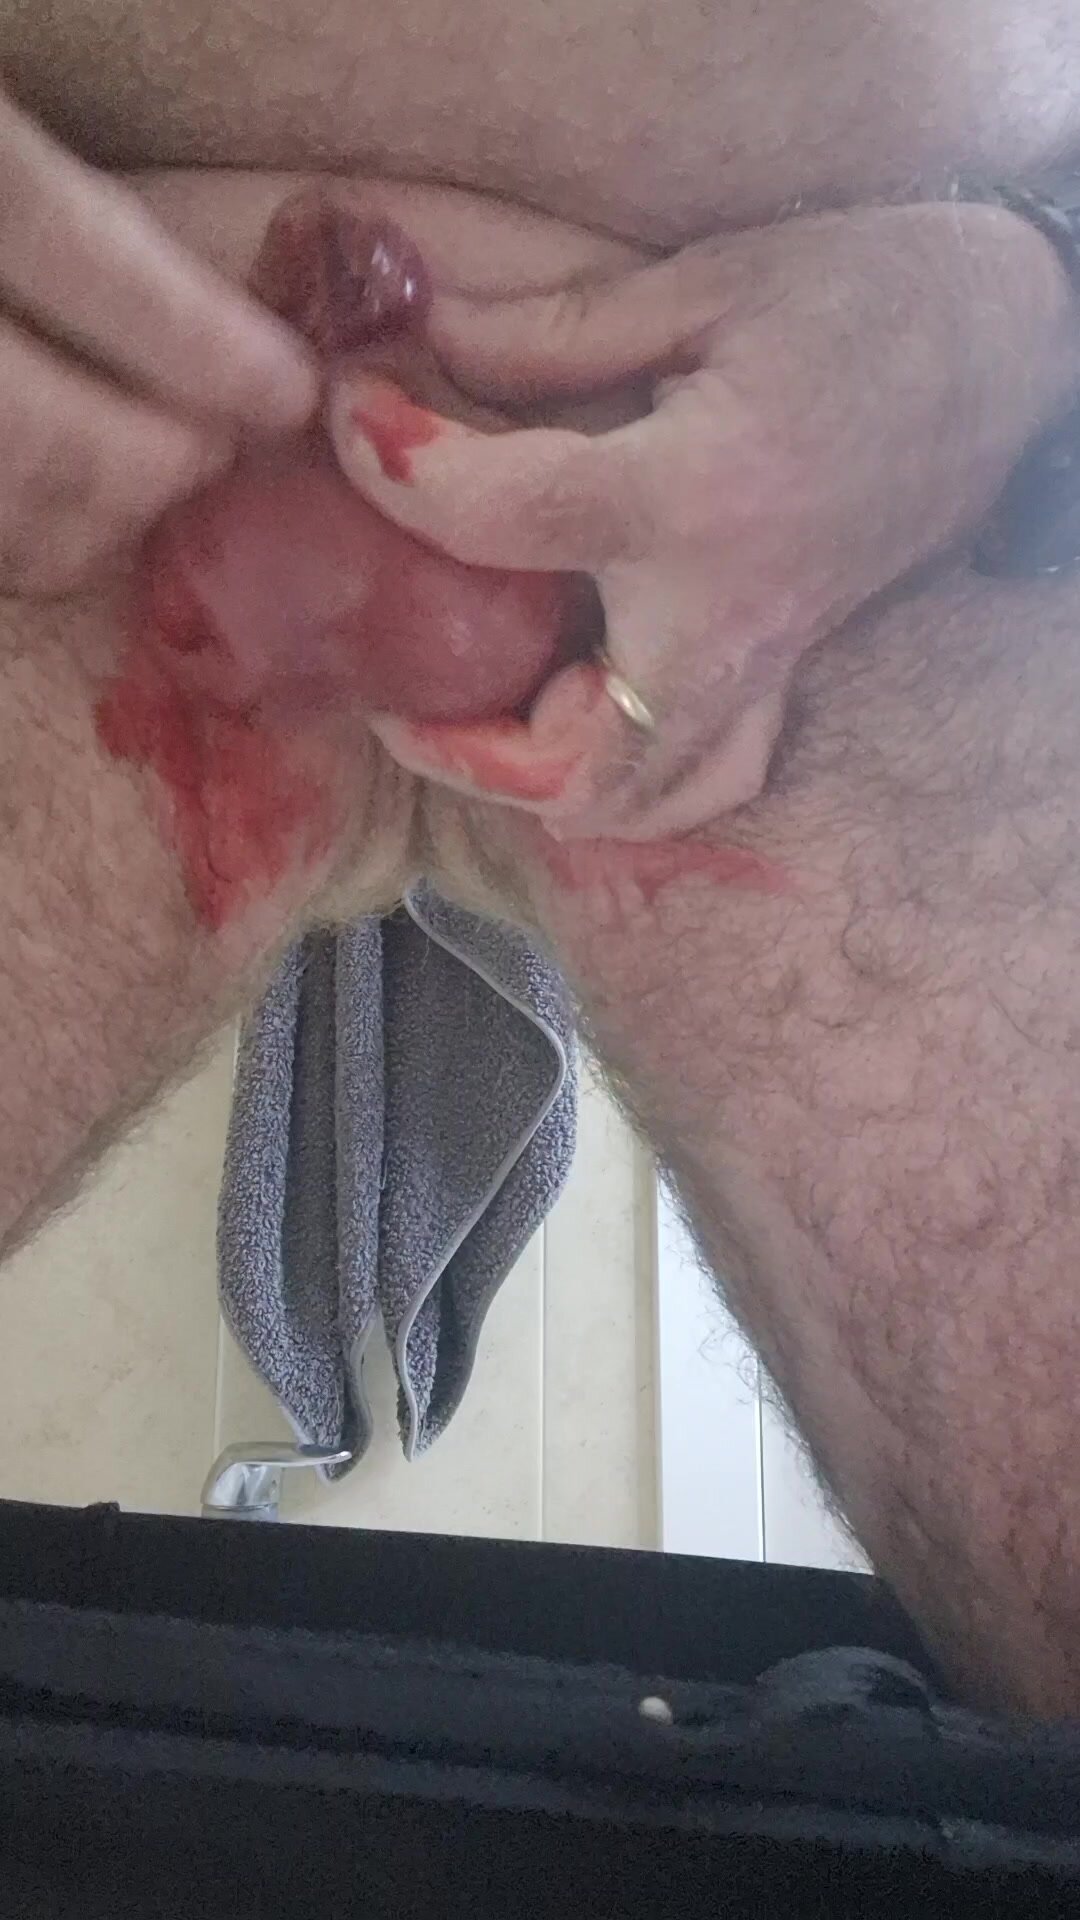 my little dick after needless and cut